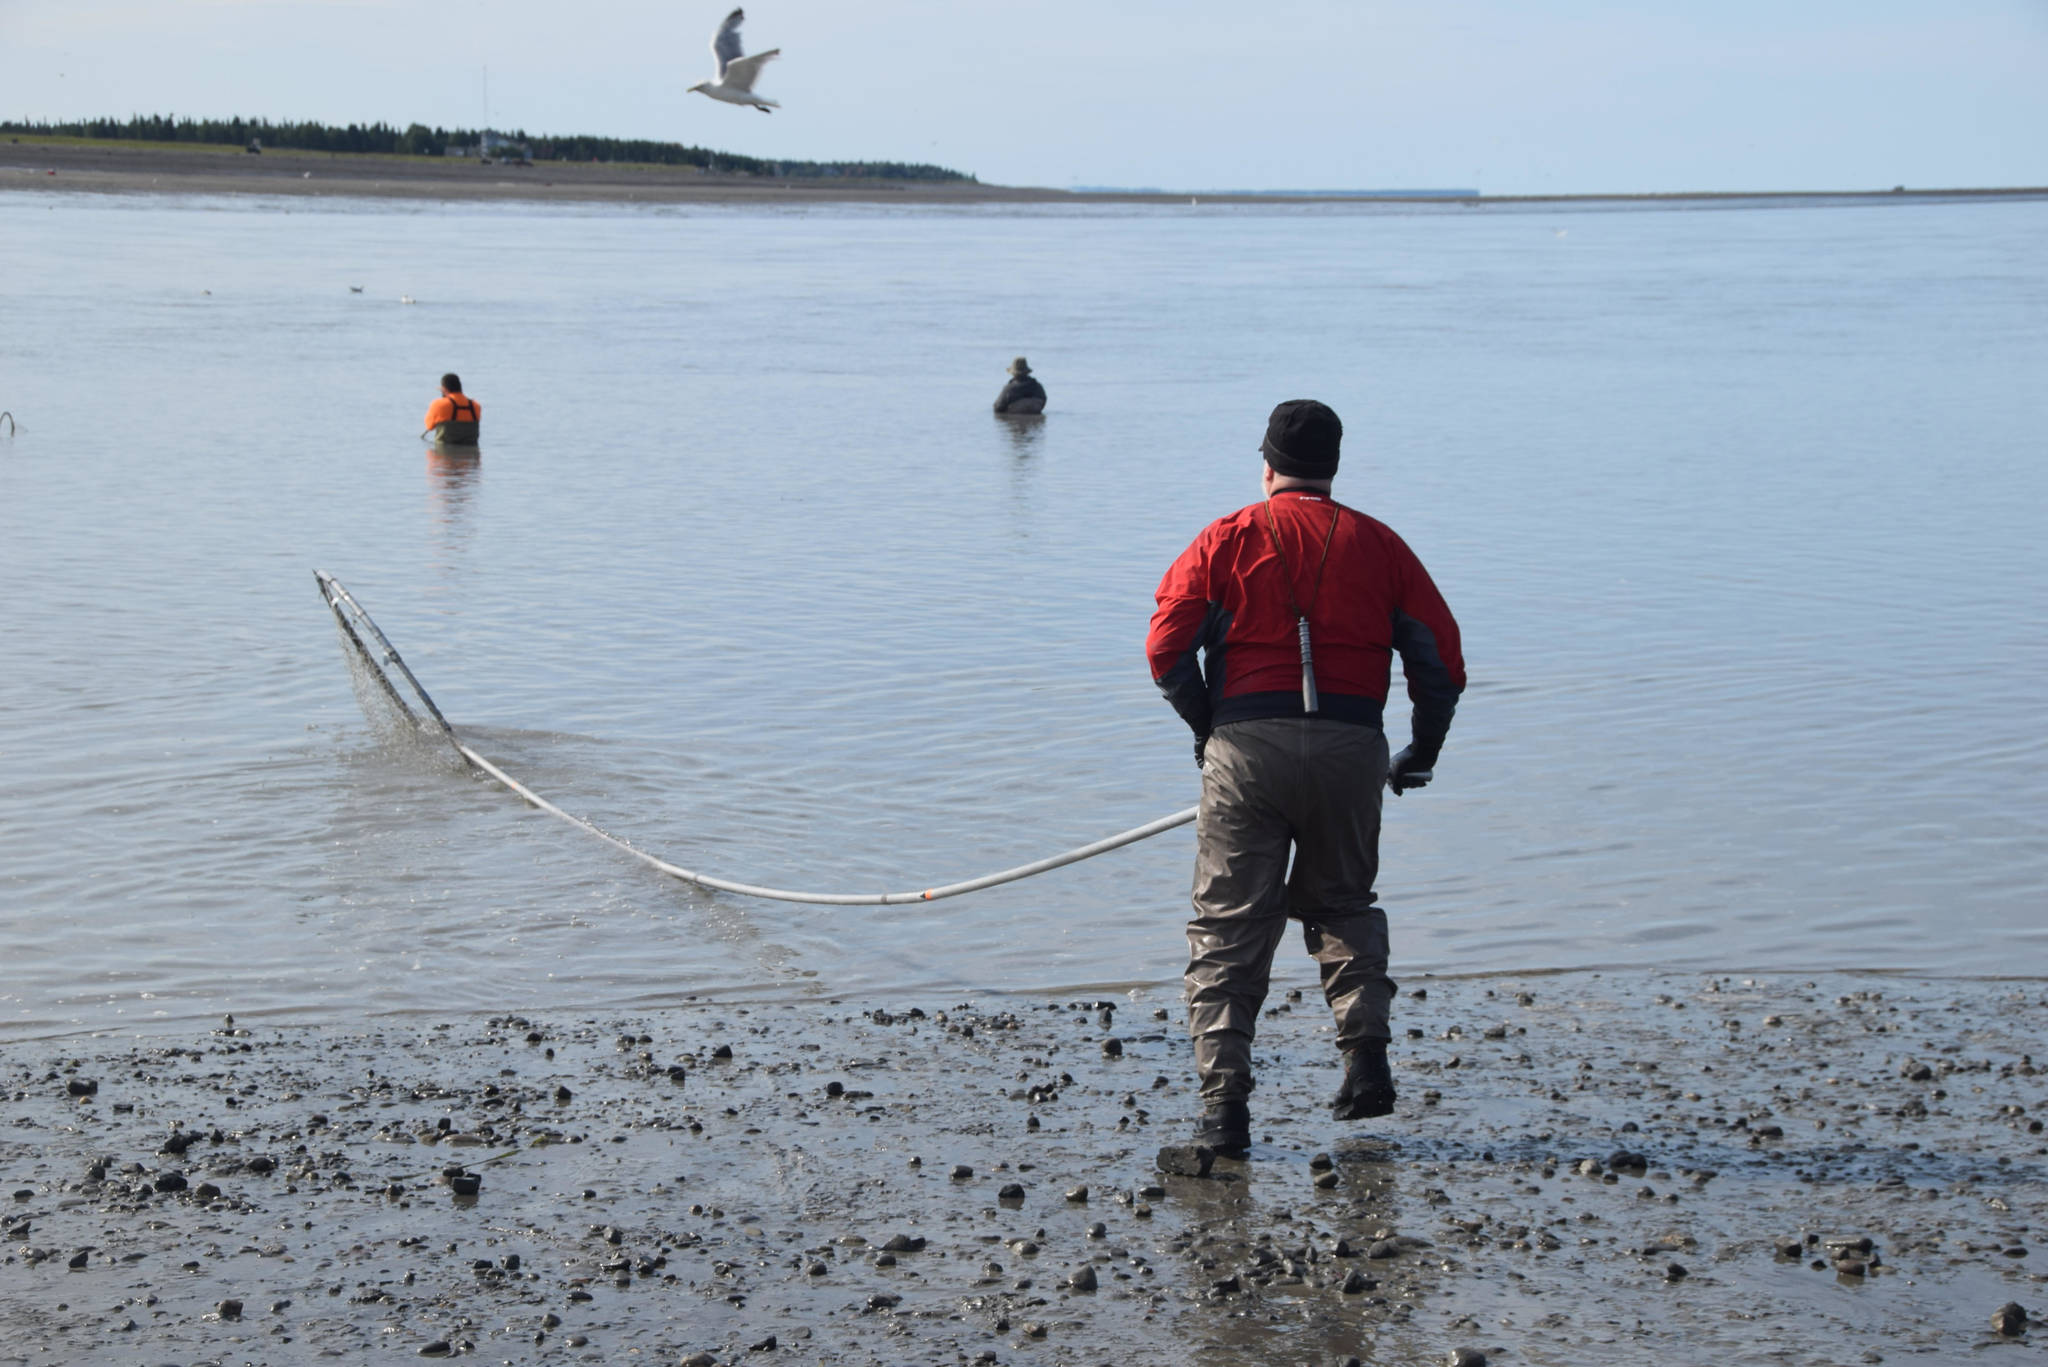 John Hakla from Eagle River heads back into the water while dipnetting on the North Kenai Beach on Wednesday, July 17, 2019. (Photo by Brian Mazurek/Peninsula Clarion file)